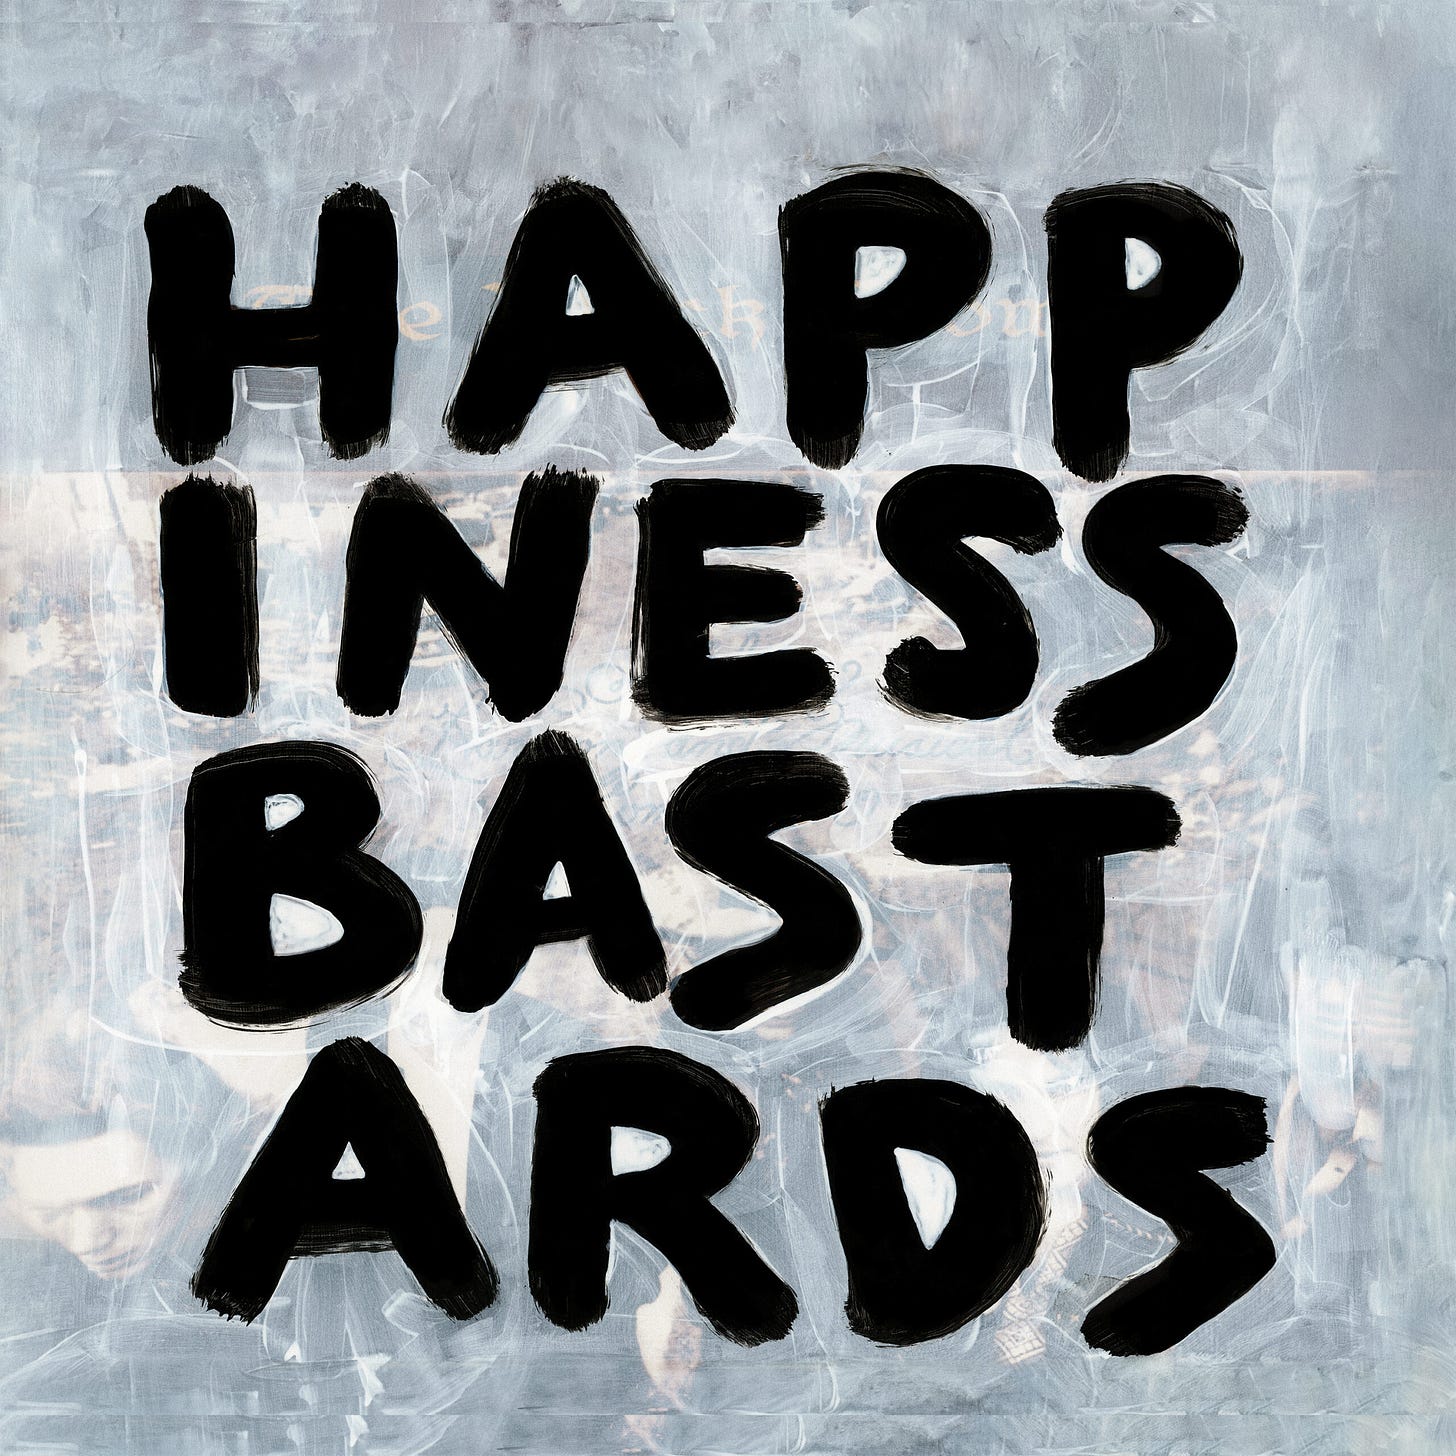 THE BLACK CROWES ANNOUNCE THEIR FIRST NEW ALBUM IN 15 YEARS HAPPINESS  BASTARDS - The Black Crowes